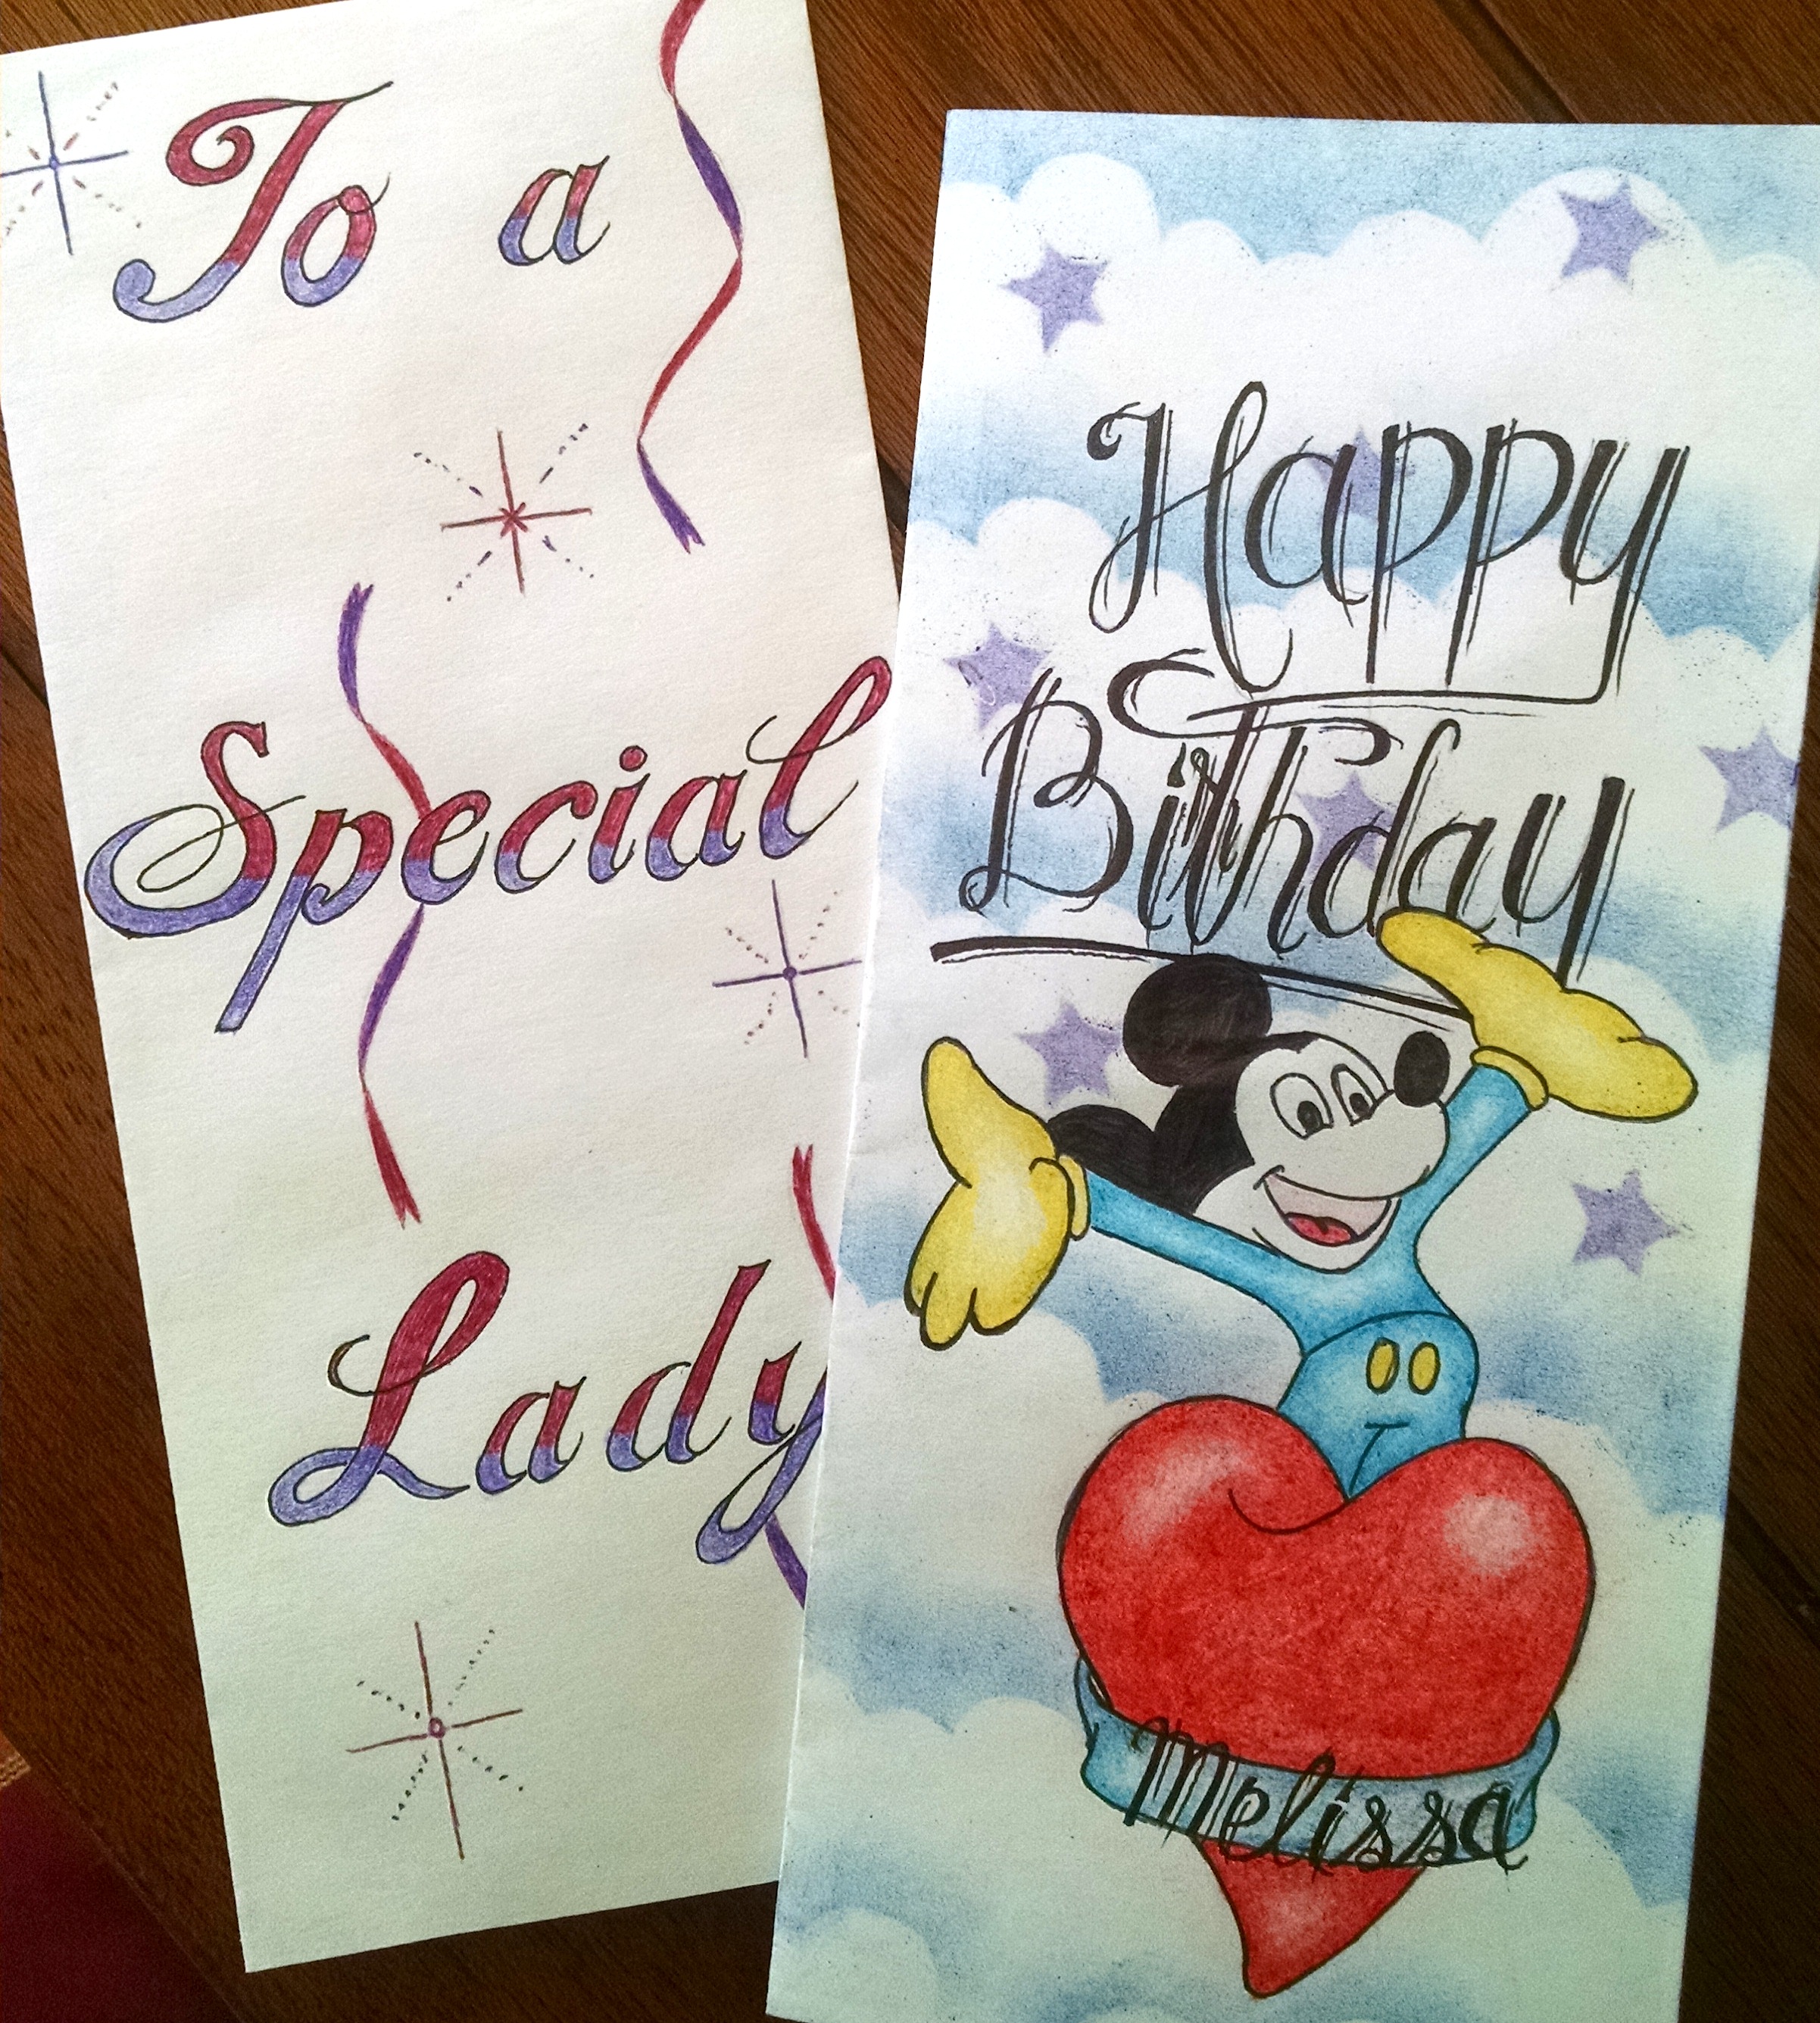 bday cards